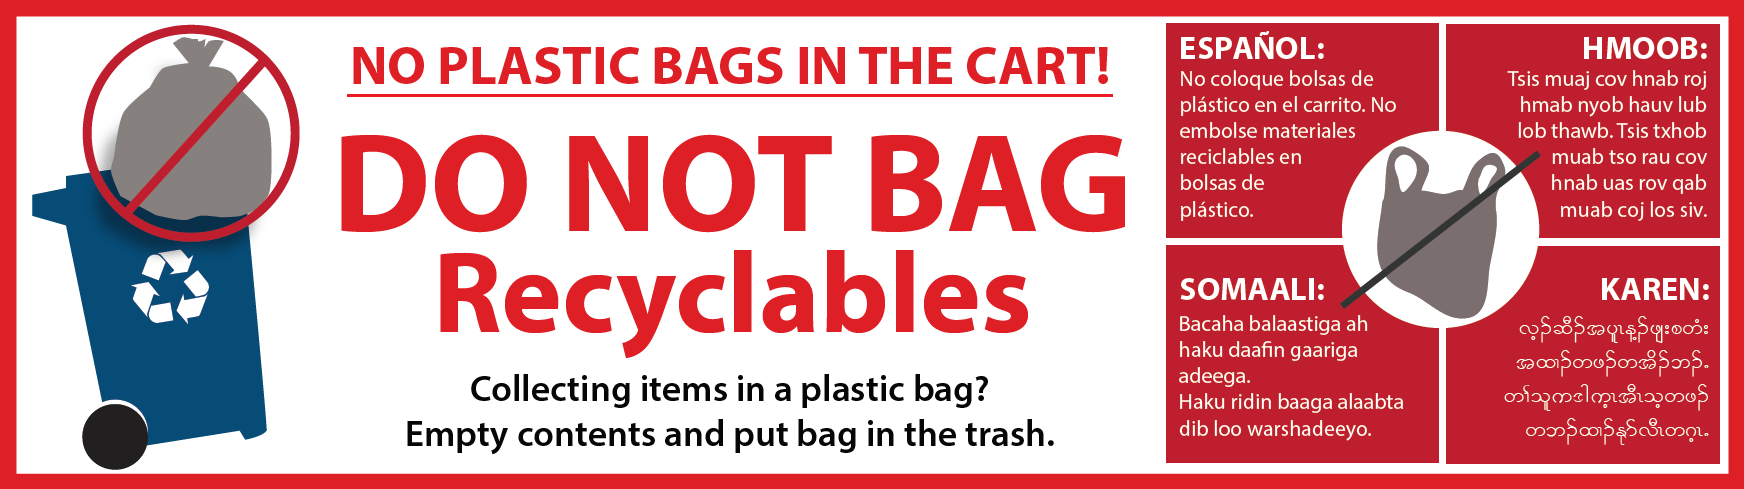 No plastic bags decal